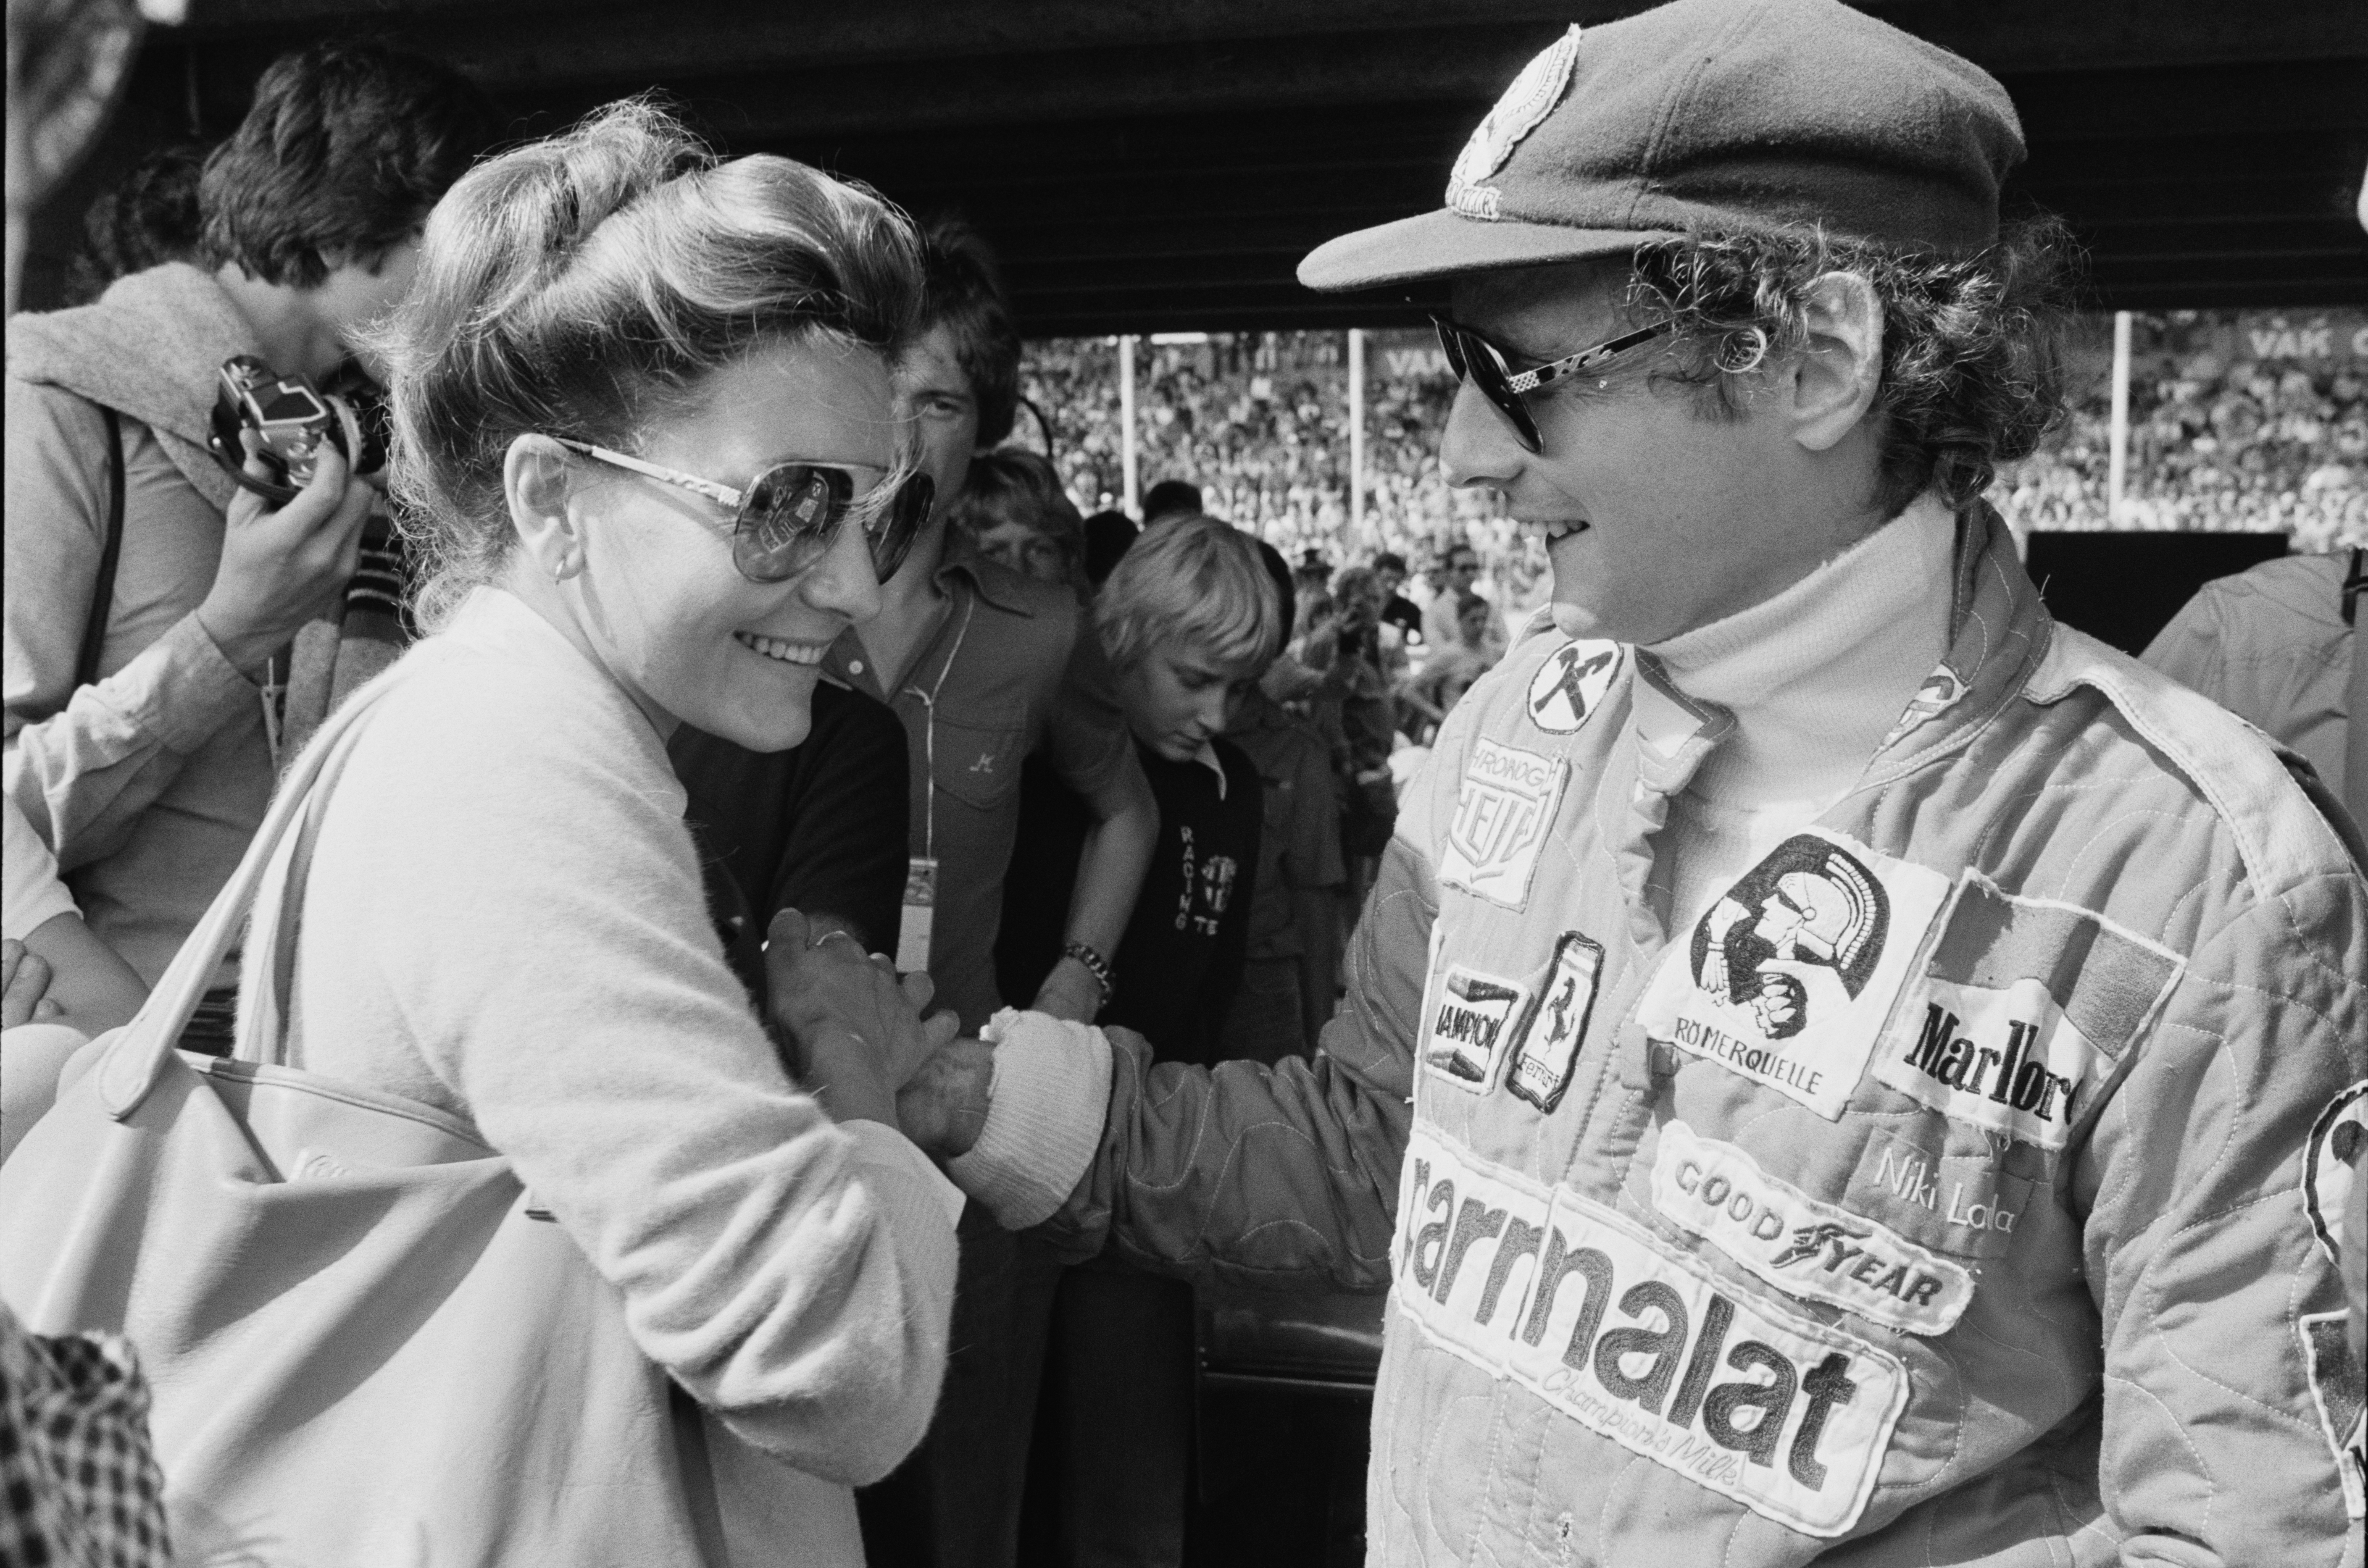 Marlene Knaus and Niki Lauda at the Dutch Grand Prix on September 1, 1977, in Park Zandvoort, Netherlands. | Source: Getty Images